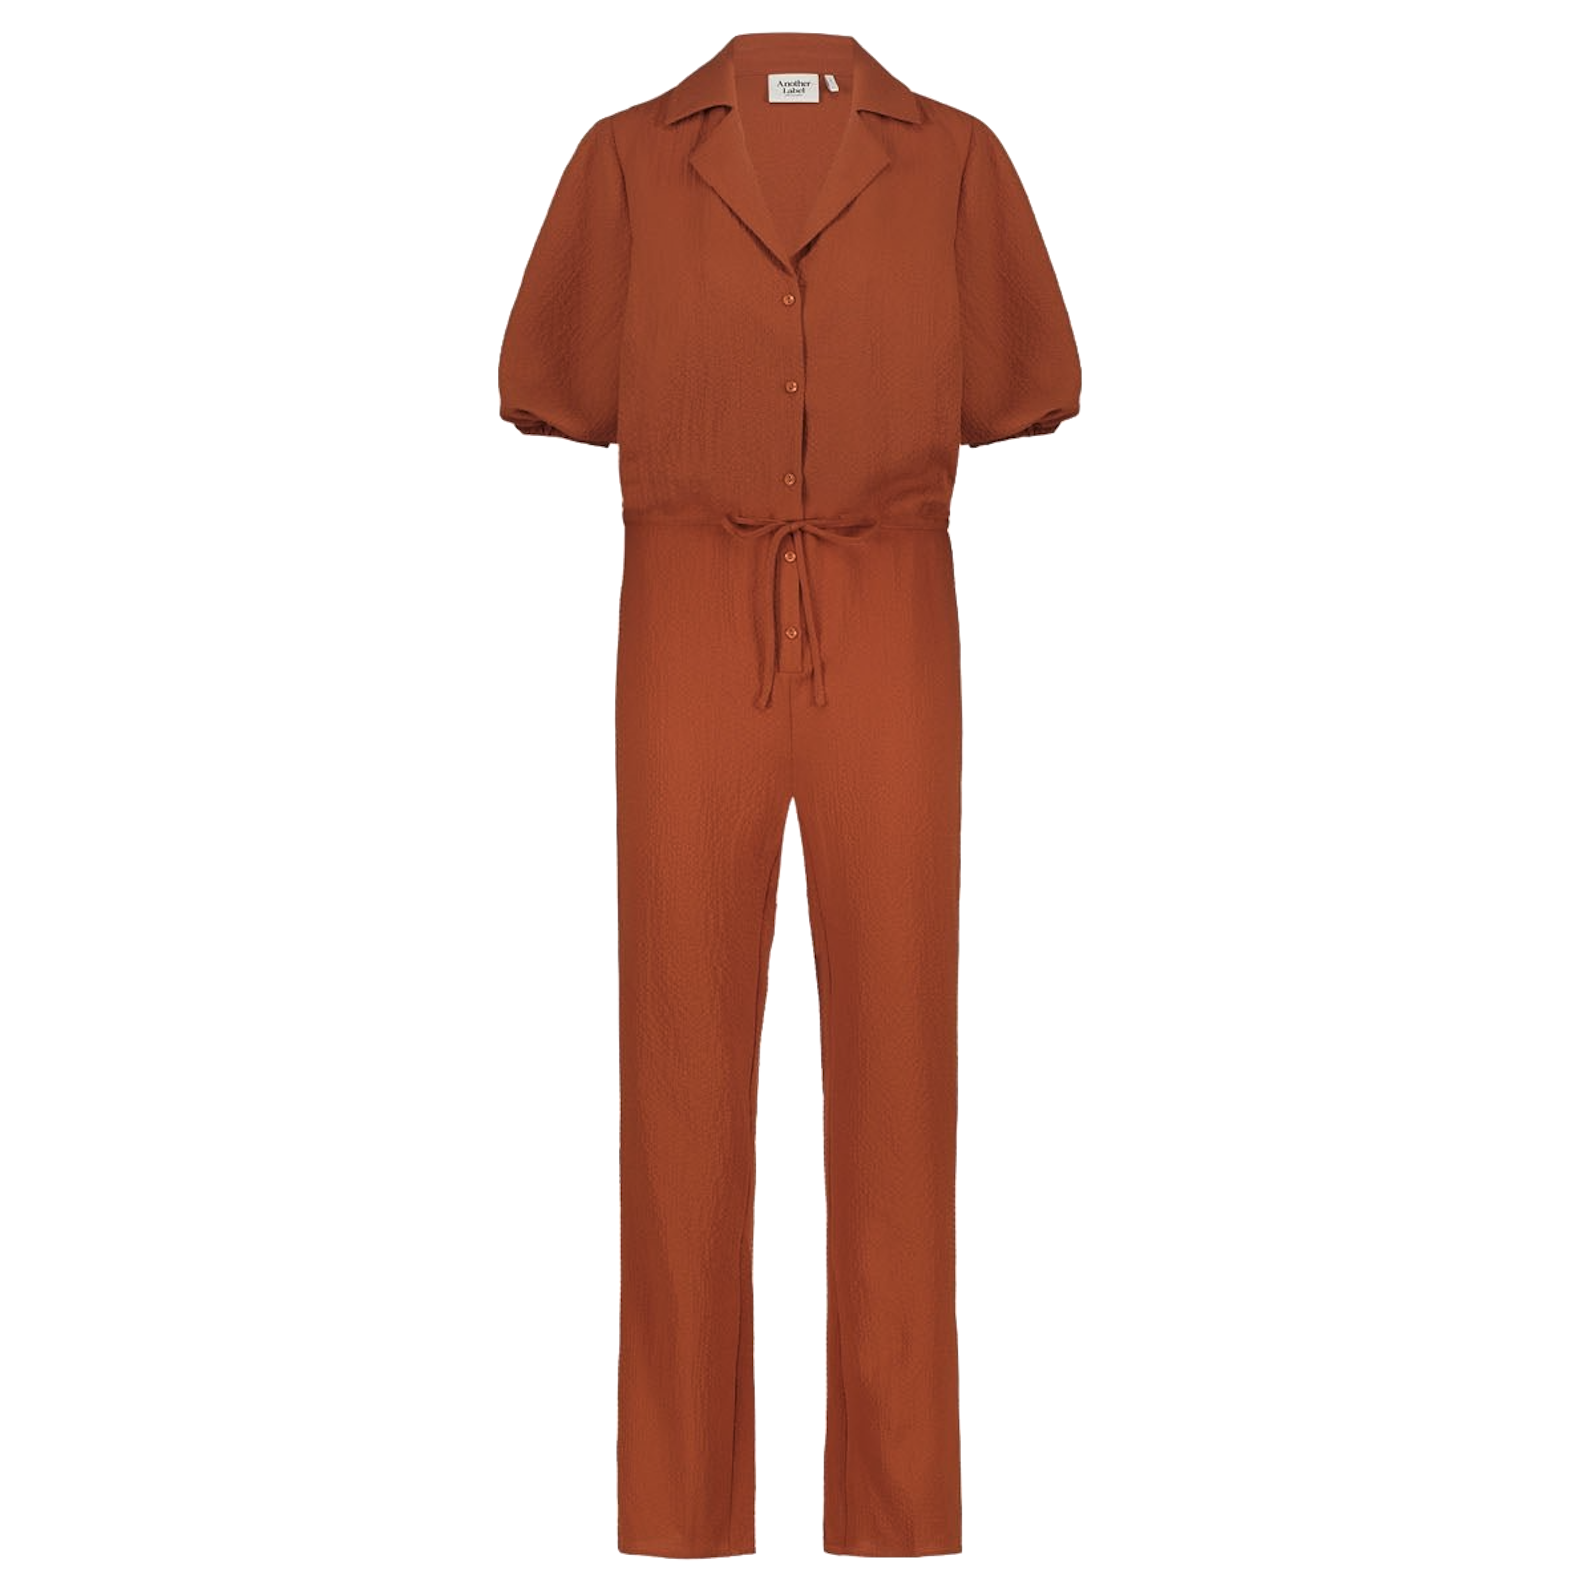 Another-Label Another-Label, Idal Jumpsuit, rooibos tea, XS